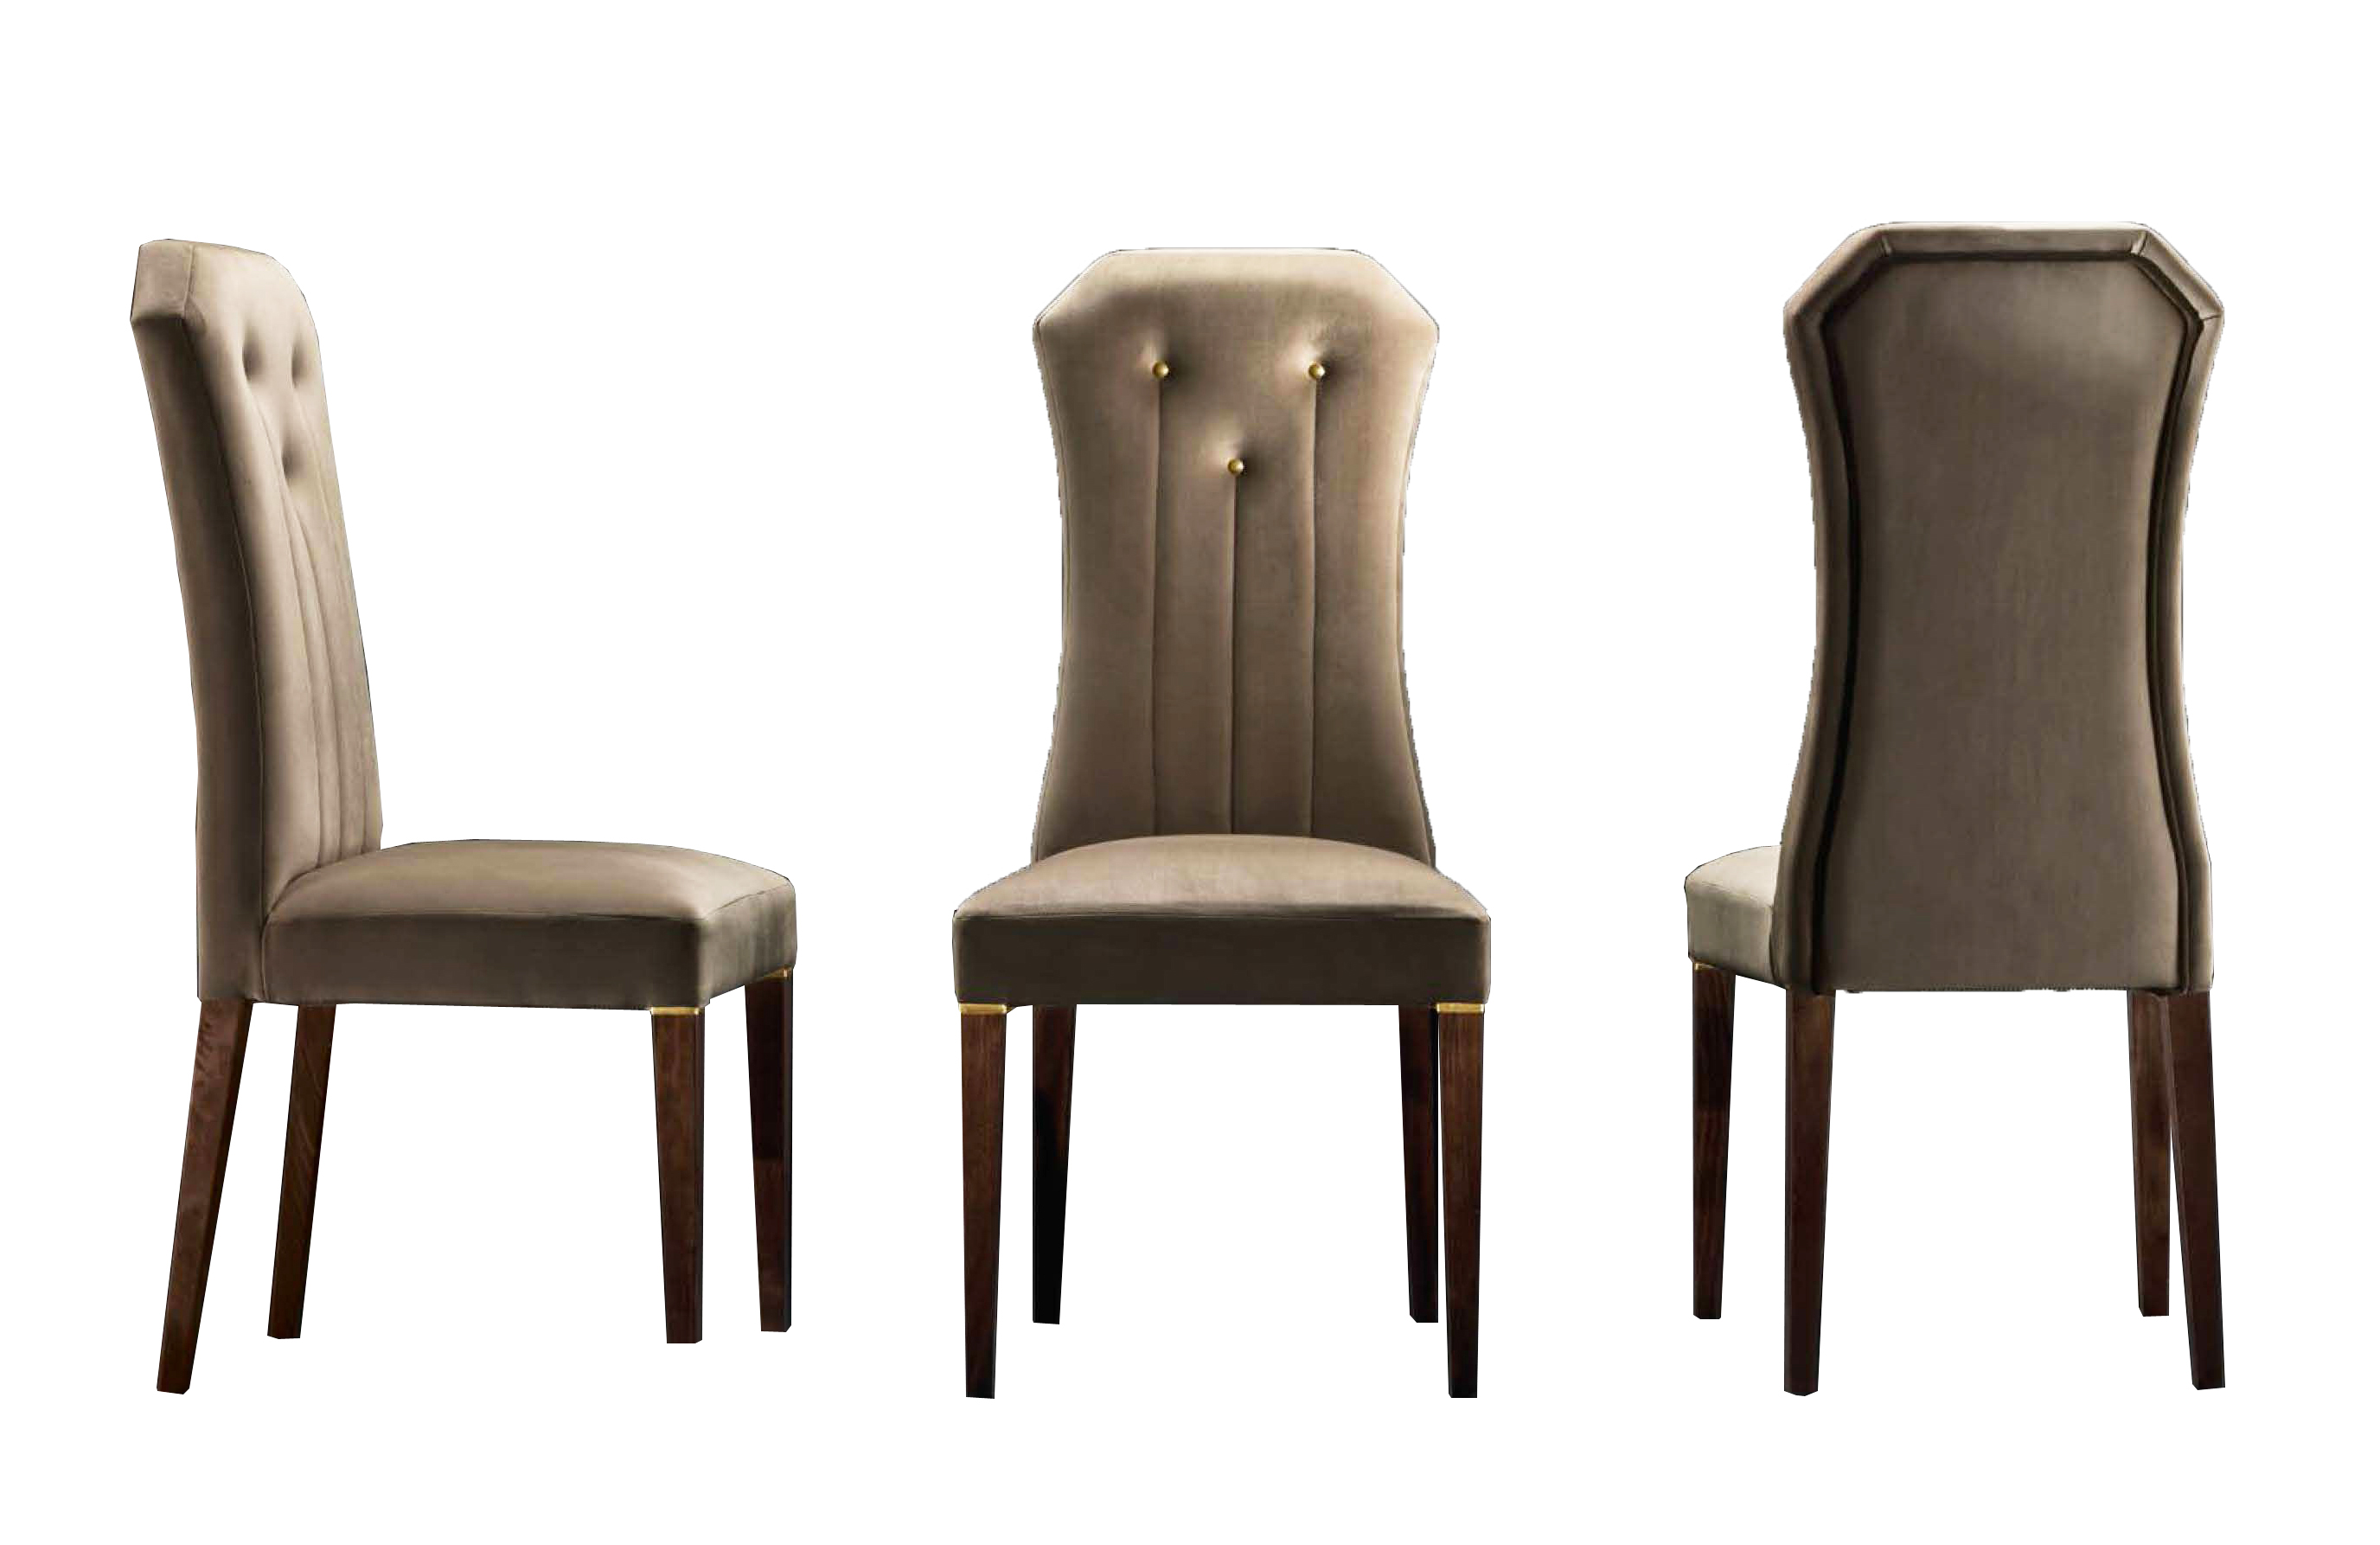 Brands Arredoclassic Dining Room, Italy Diamante Dining Chair by Arredoclassic